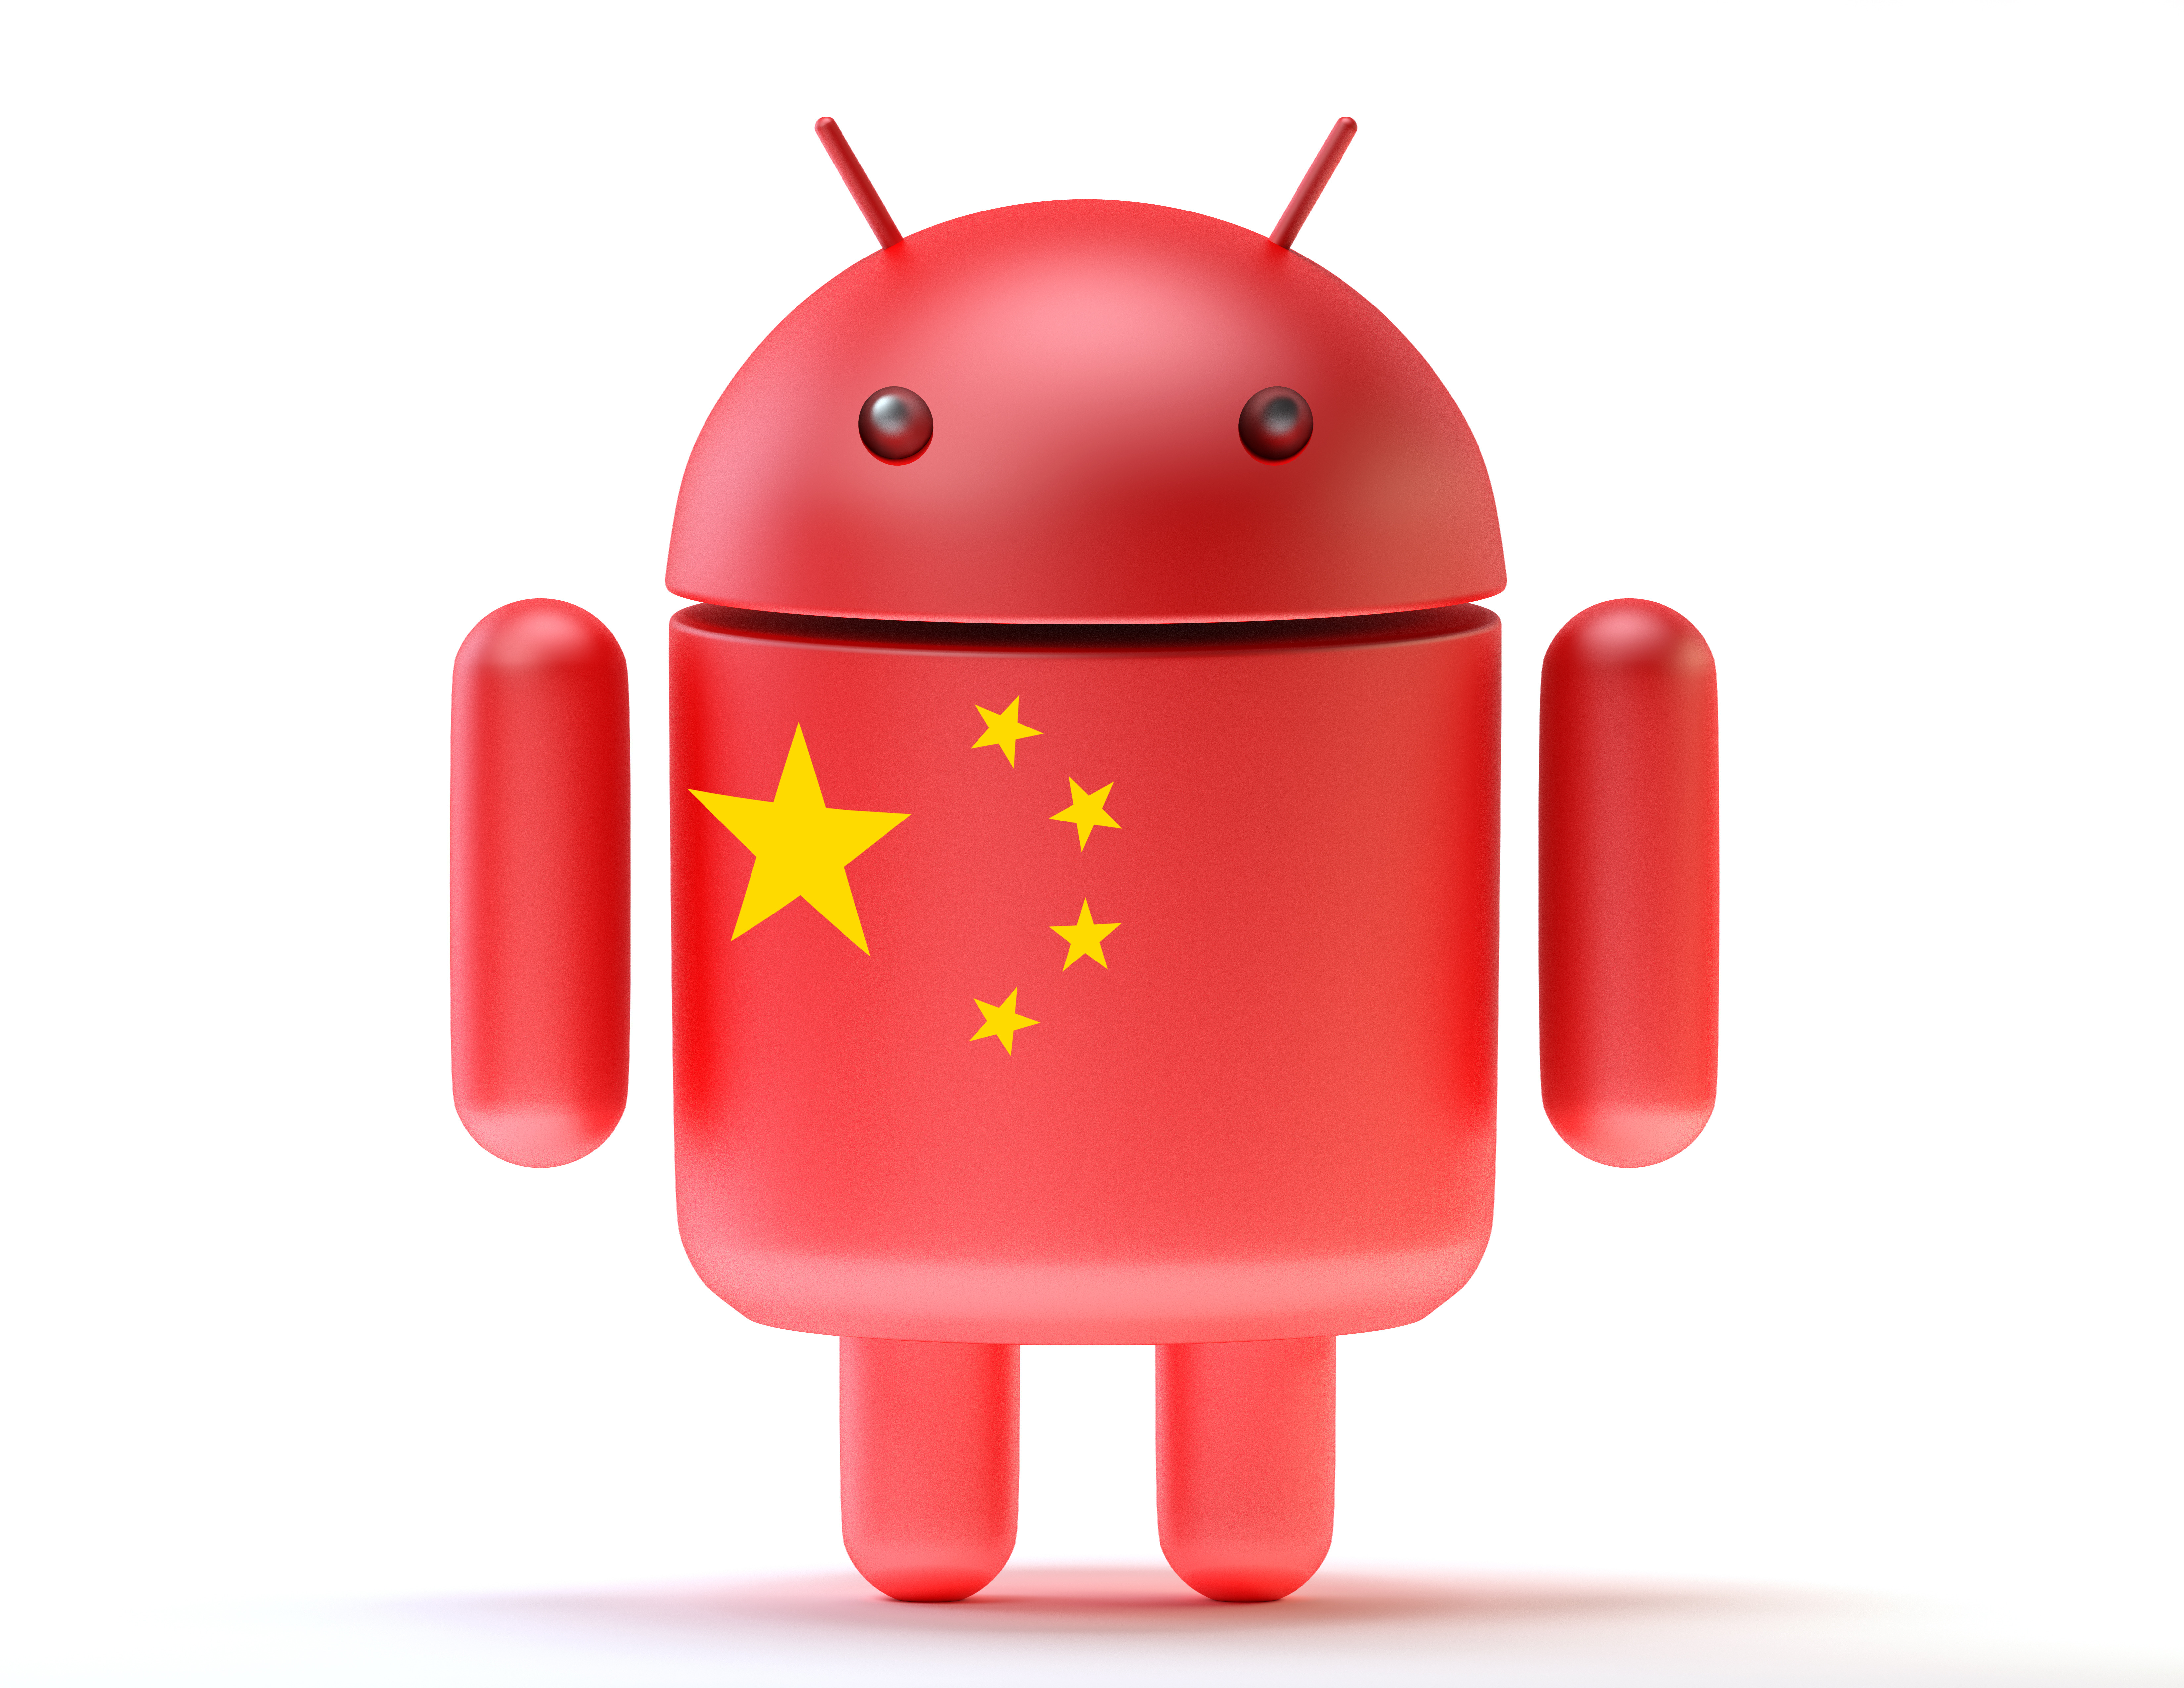 android-textured-with-flag-of-china-technology-concept_fJDtROCu.jpg